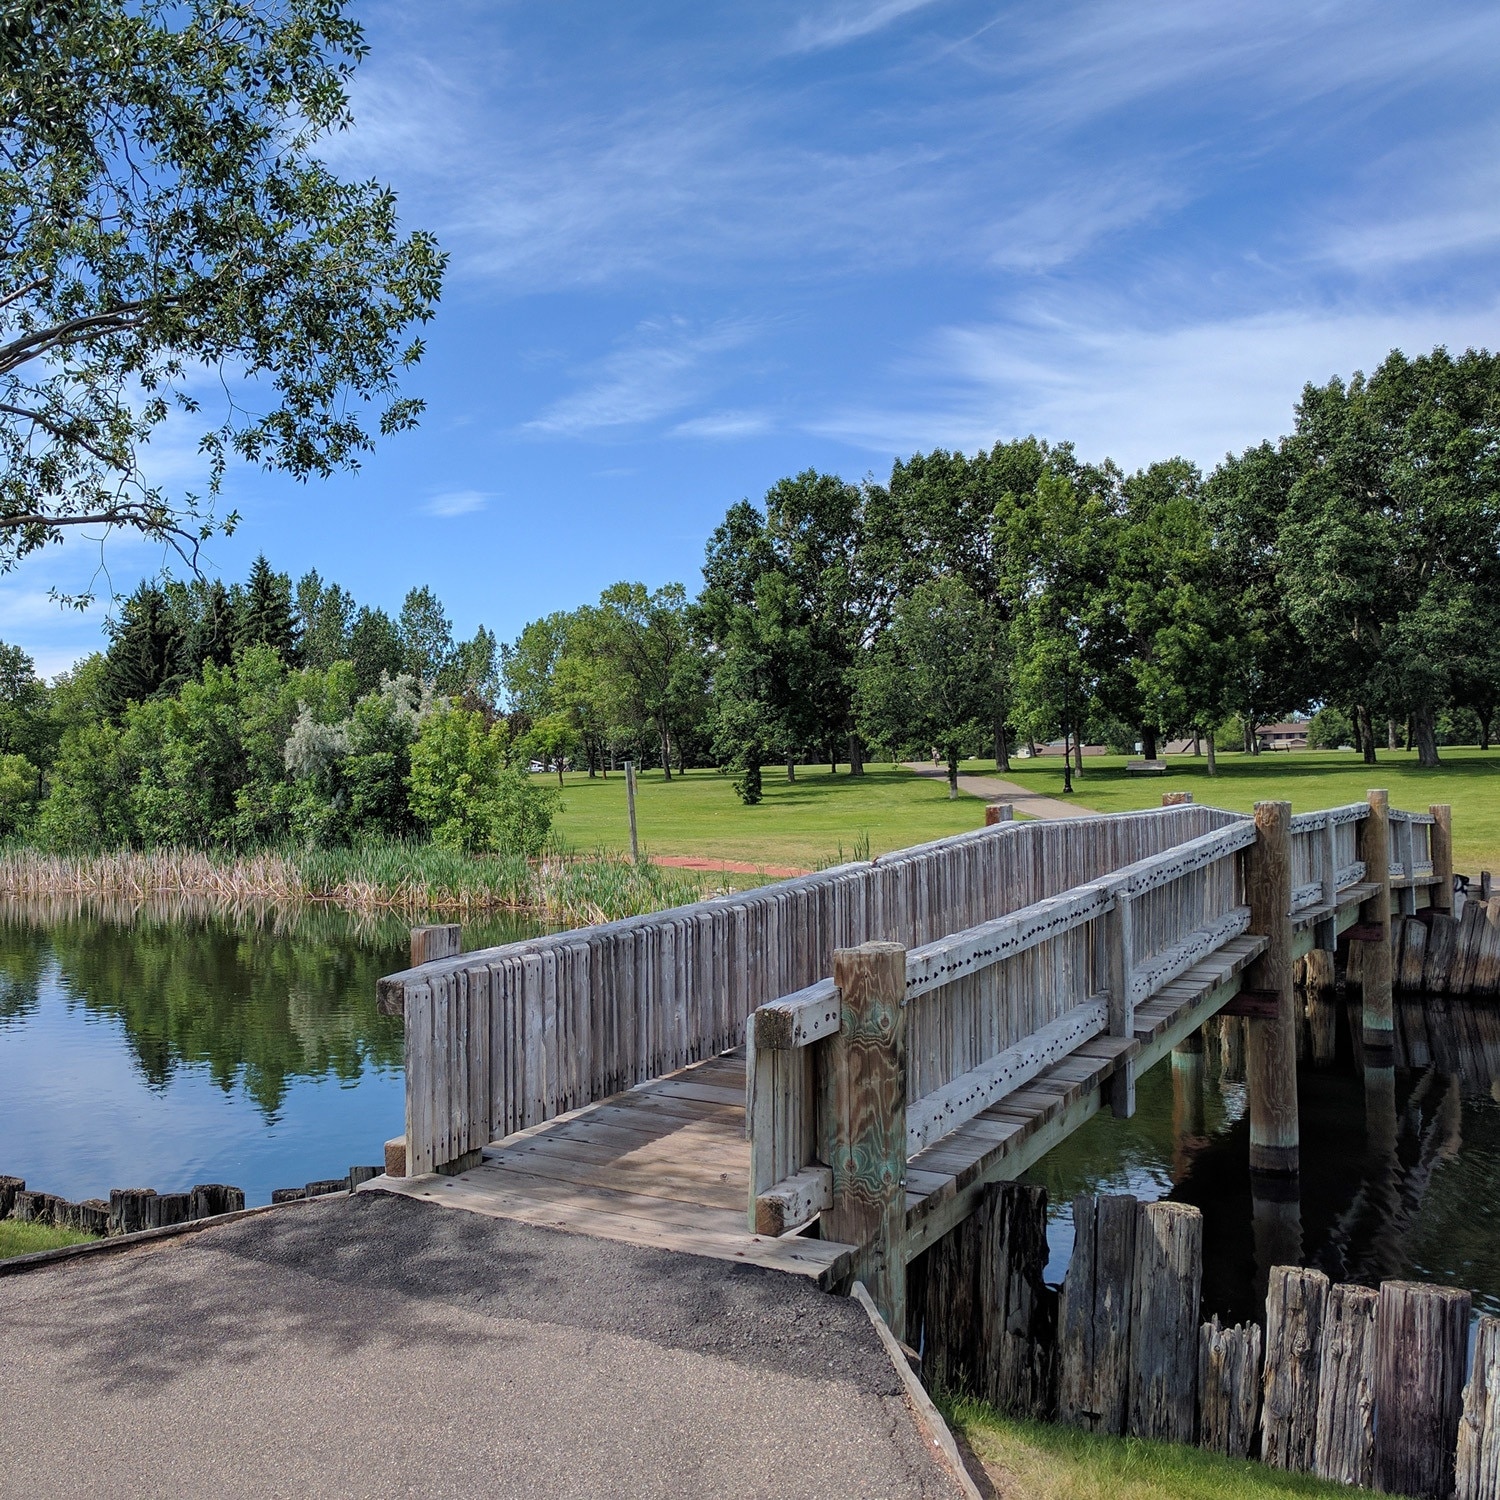 The park is named after Nicholas Sheran who was one Alberta's first miners and coal operator. It's the perfect spot for a run, walk or cycle around the lake. You might even catch a fisherman on the shores trying to catch a fish!